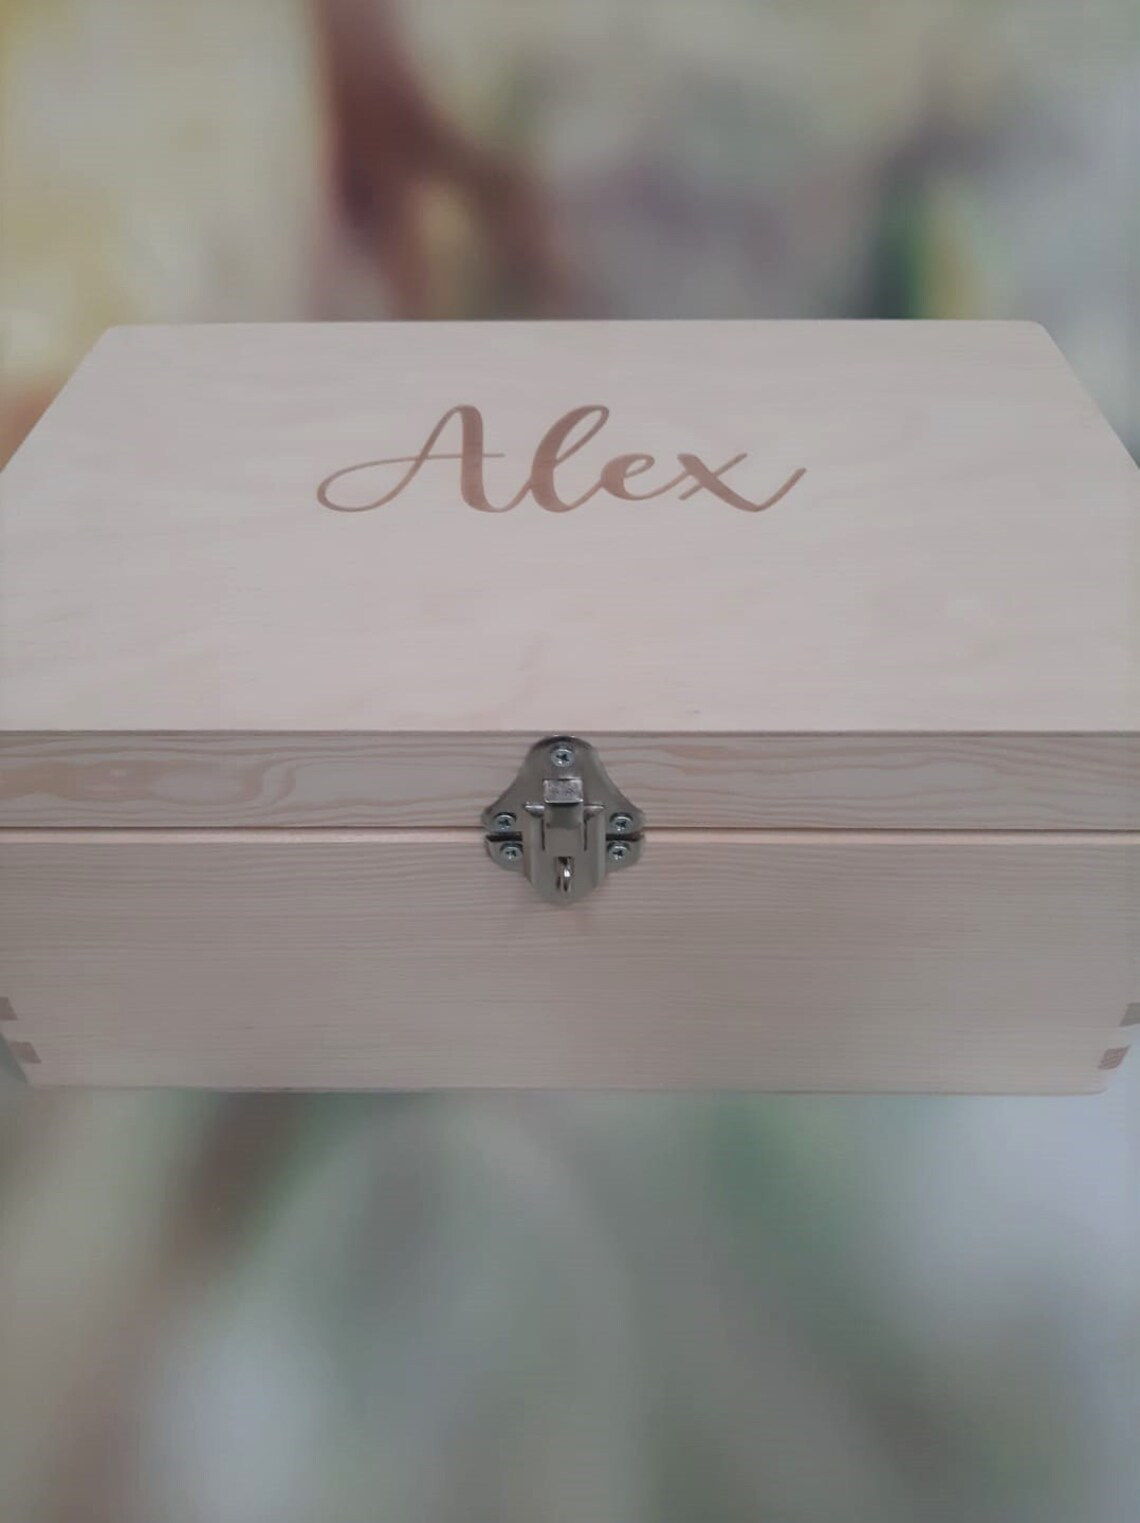 Pre-Personalised Wooden Box With Alex Engraved On Lid - Clasp